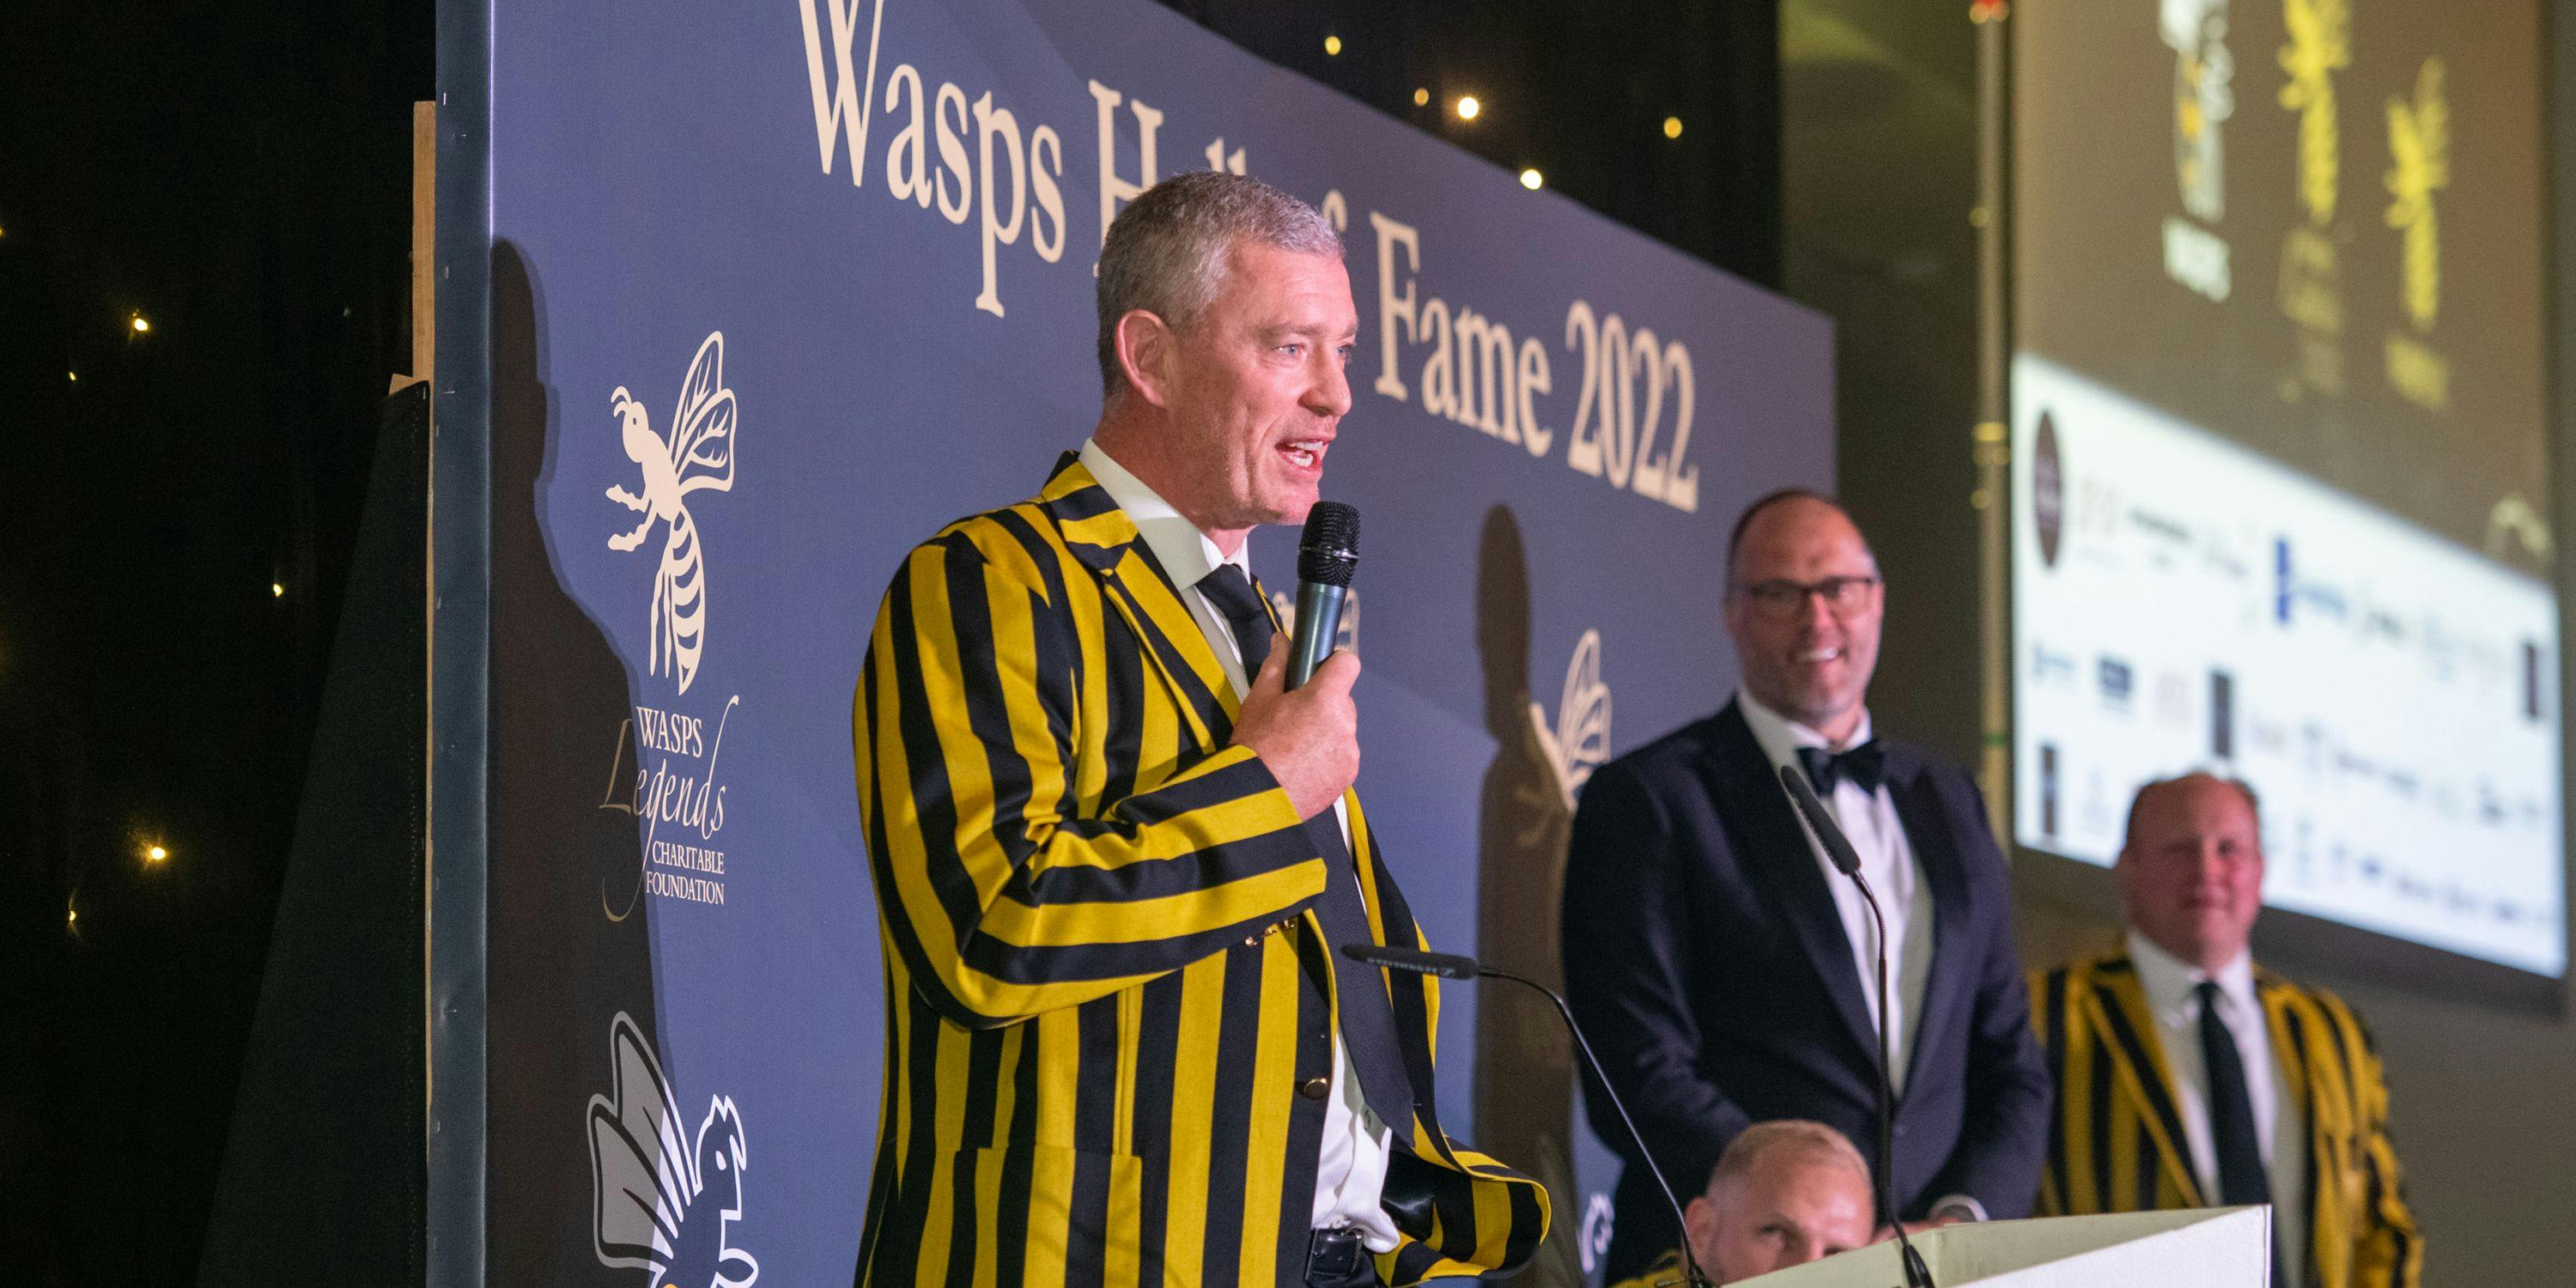 Two Wasps greats on stage at Hall of Fame 2022